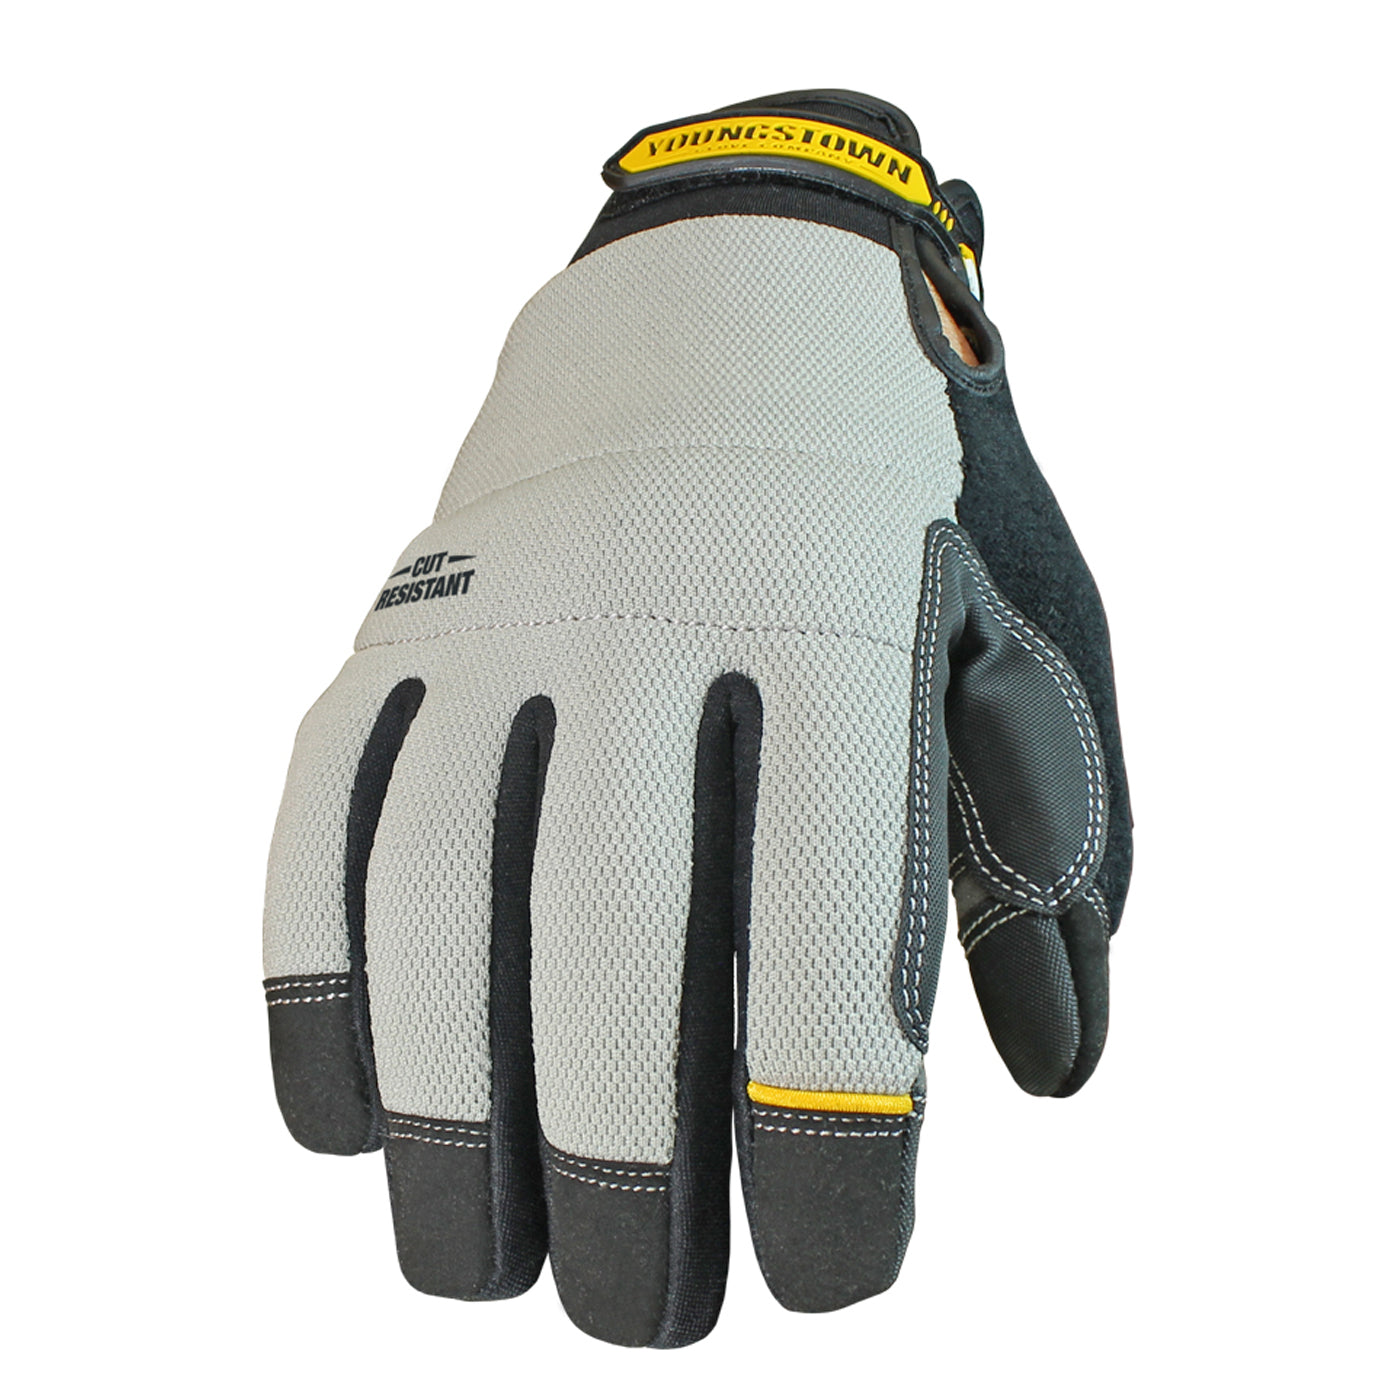 Gray Cut Resistant Safety Gloves - 1 pair - Vision Forward